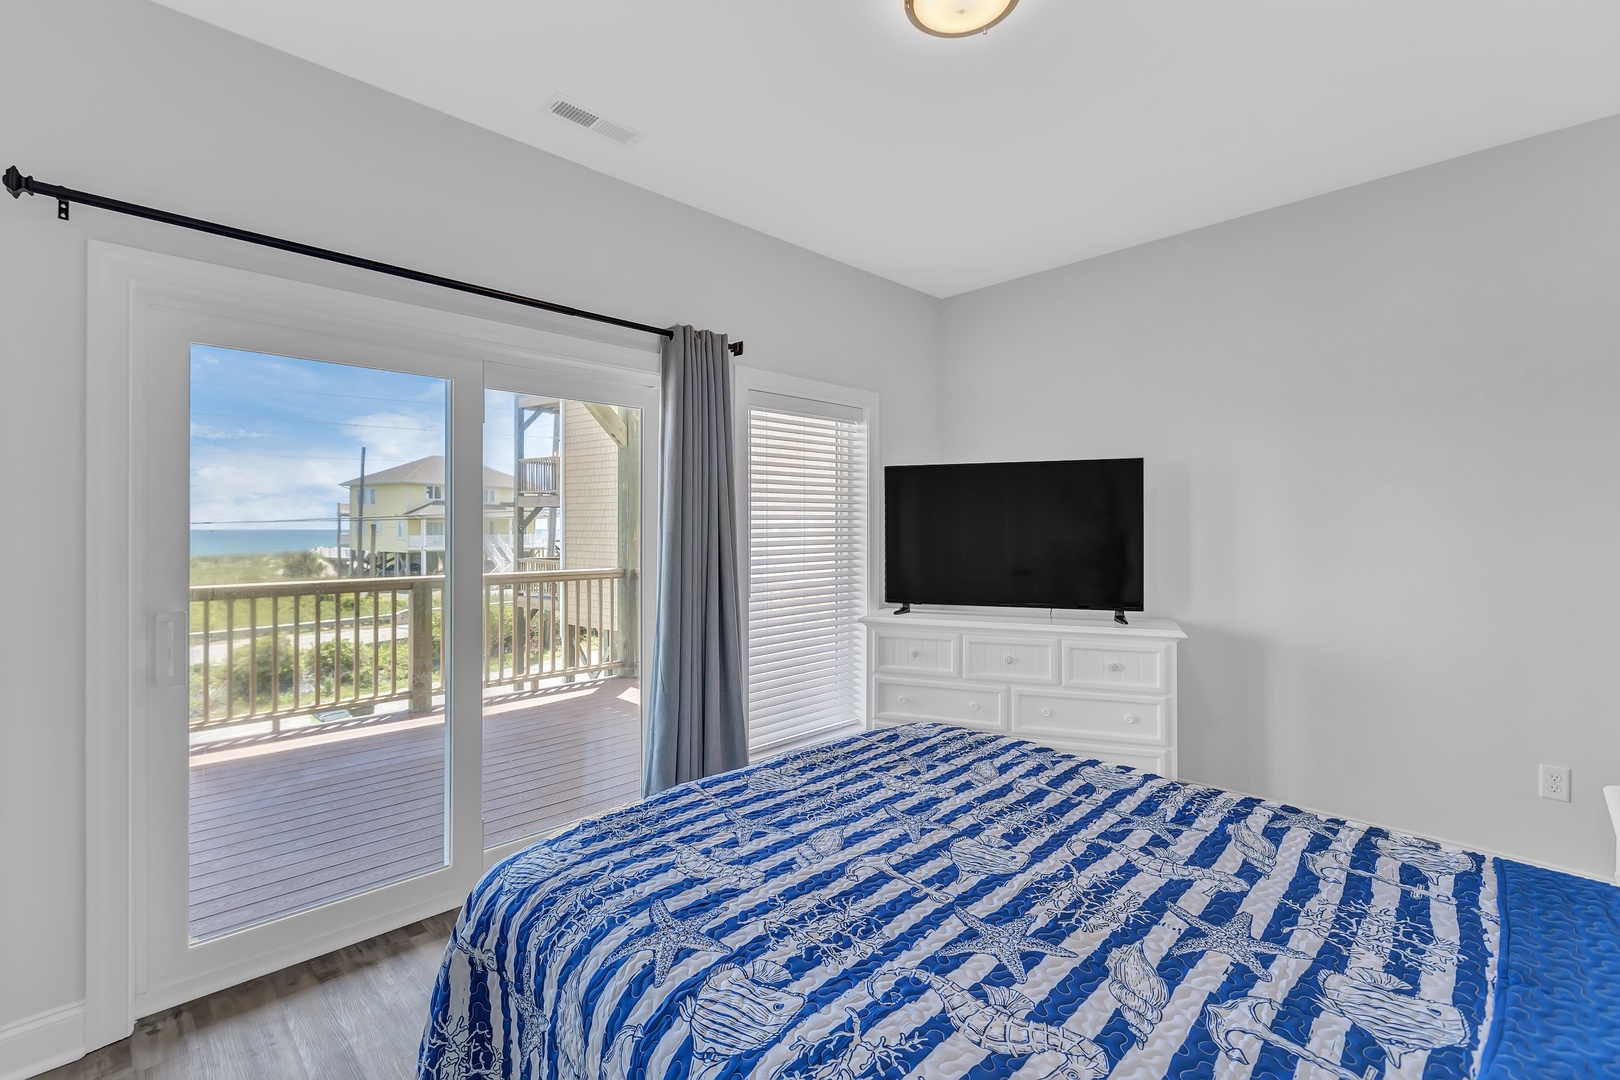 Guest bedroom queen-sized bed, a Smart TV, access to an ocean-view balcony, and an ensuite bathroom.